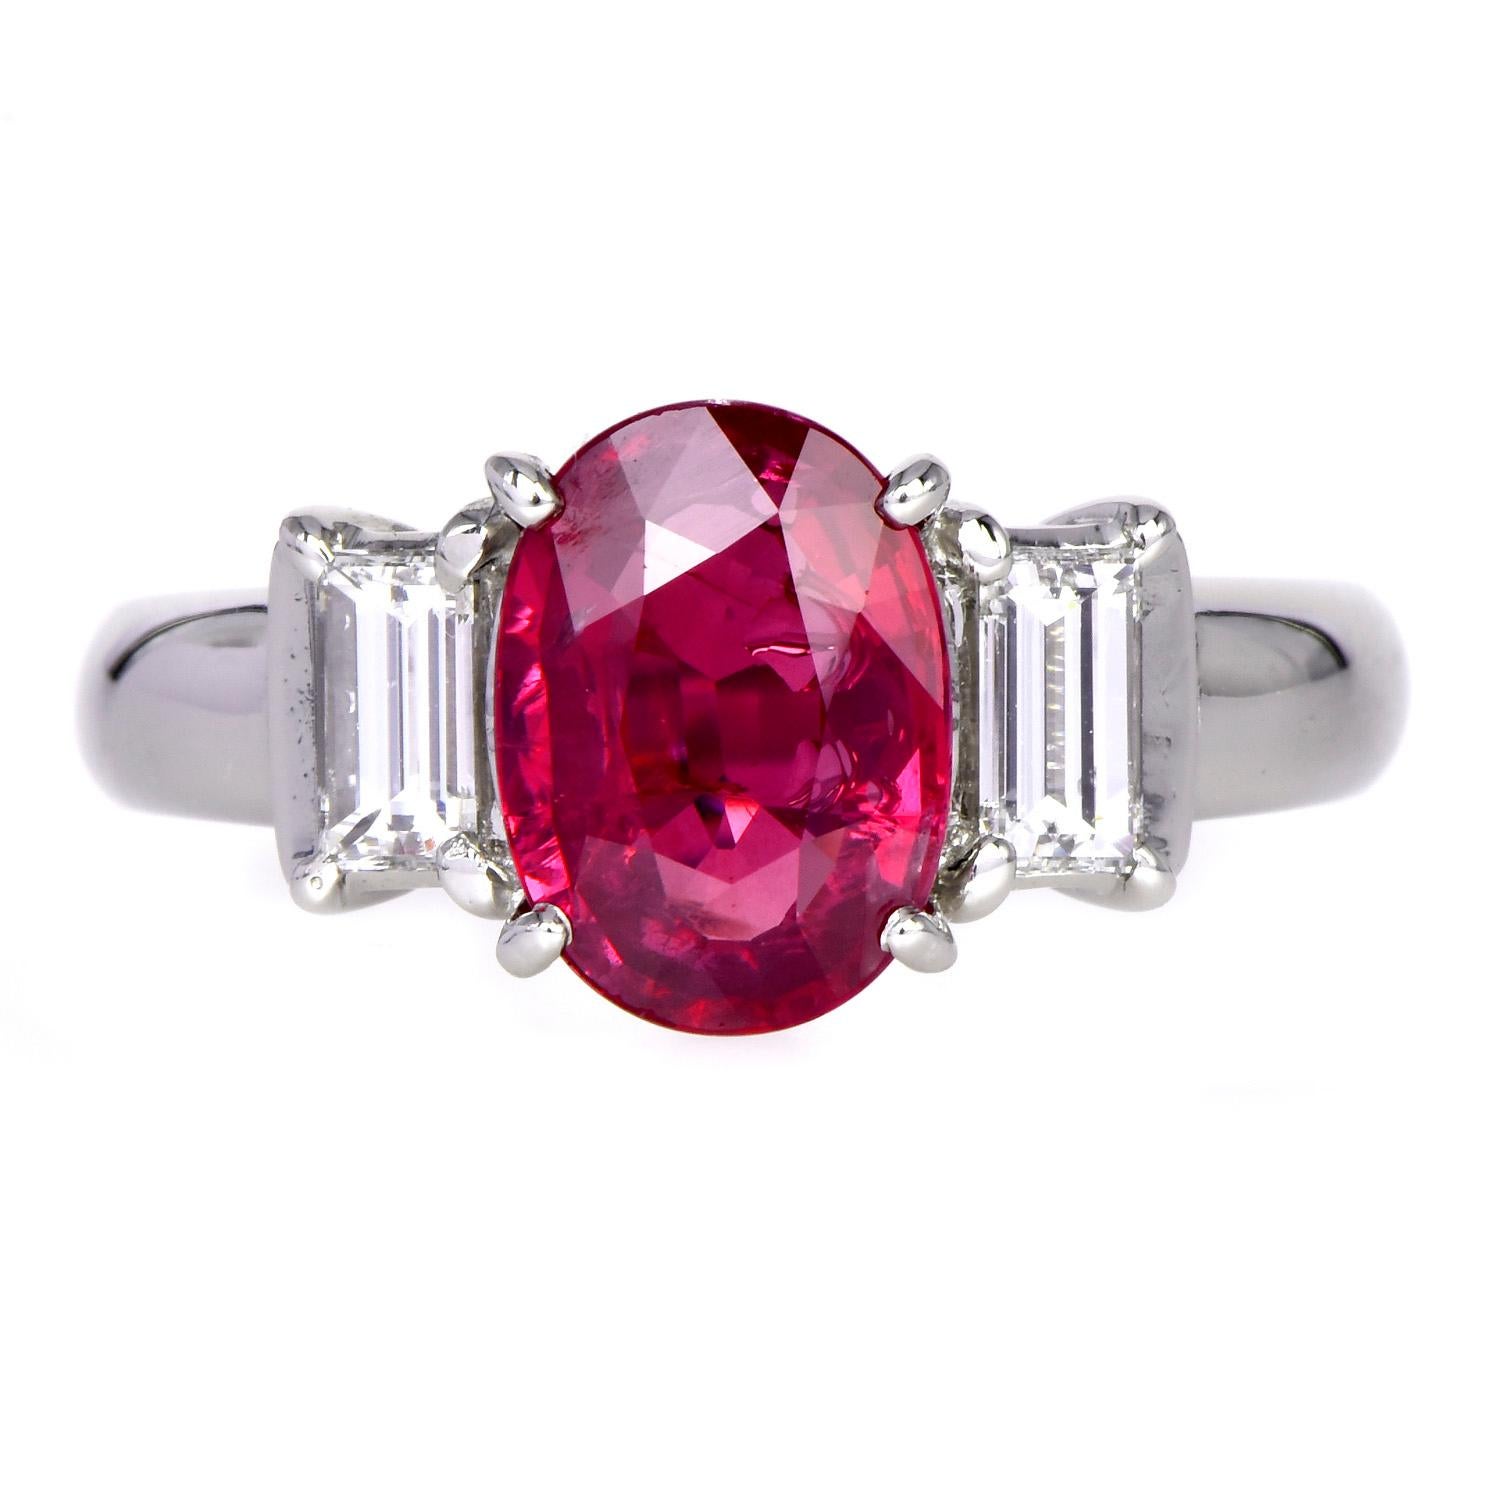 This exquisite ruby ring is versatile, can be an engagement ring and/or a classic gemstone 